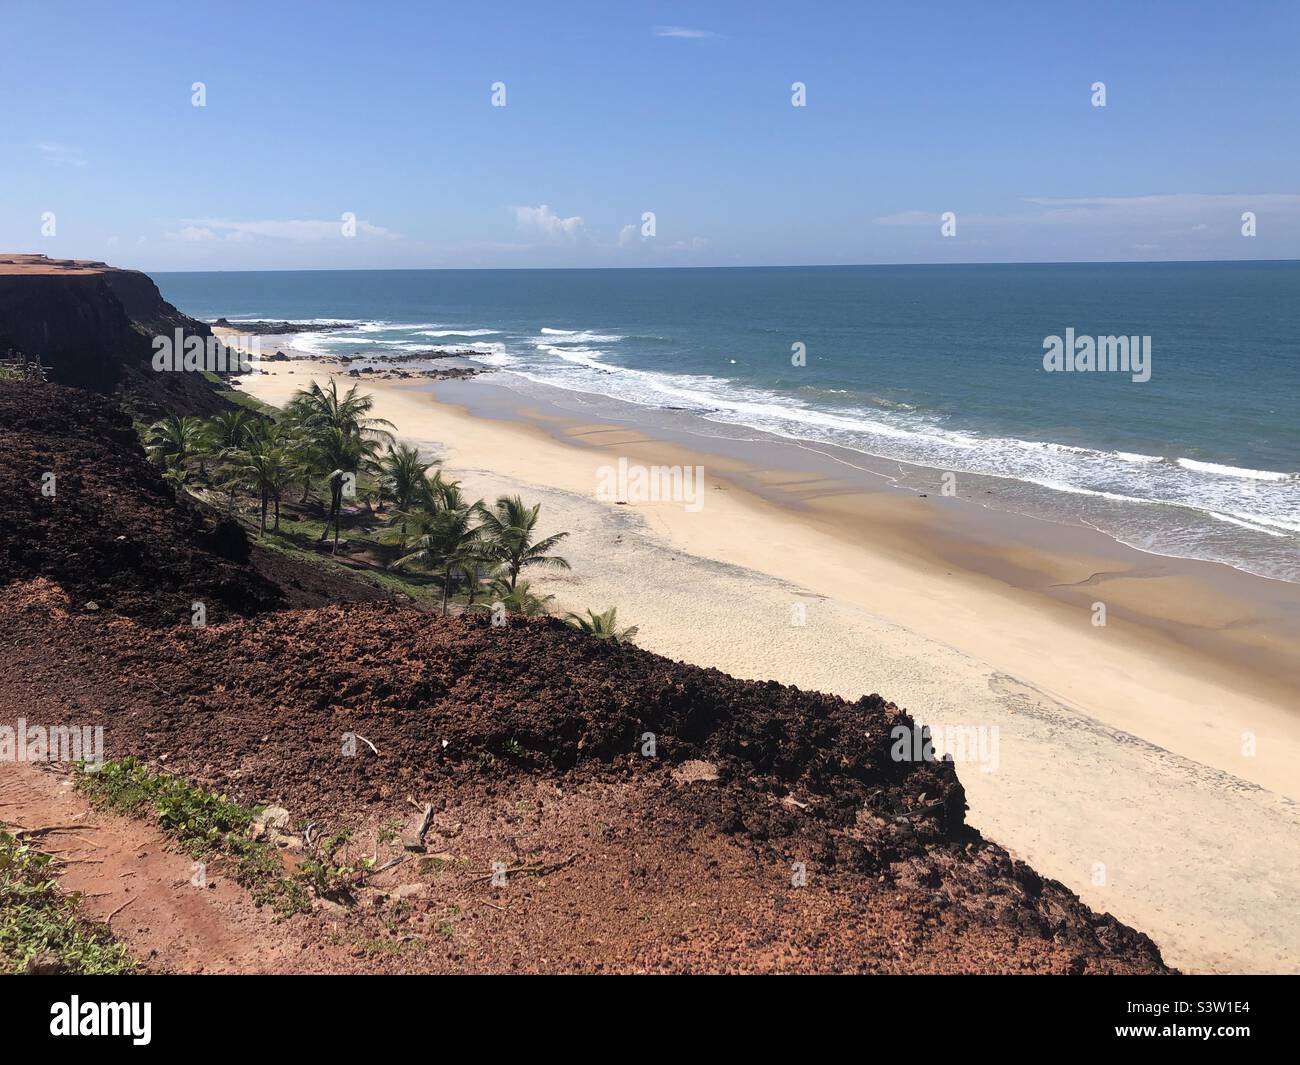 A deserted beach in northern Brazil. Stock Photo